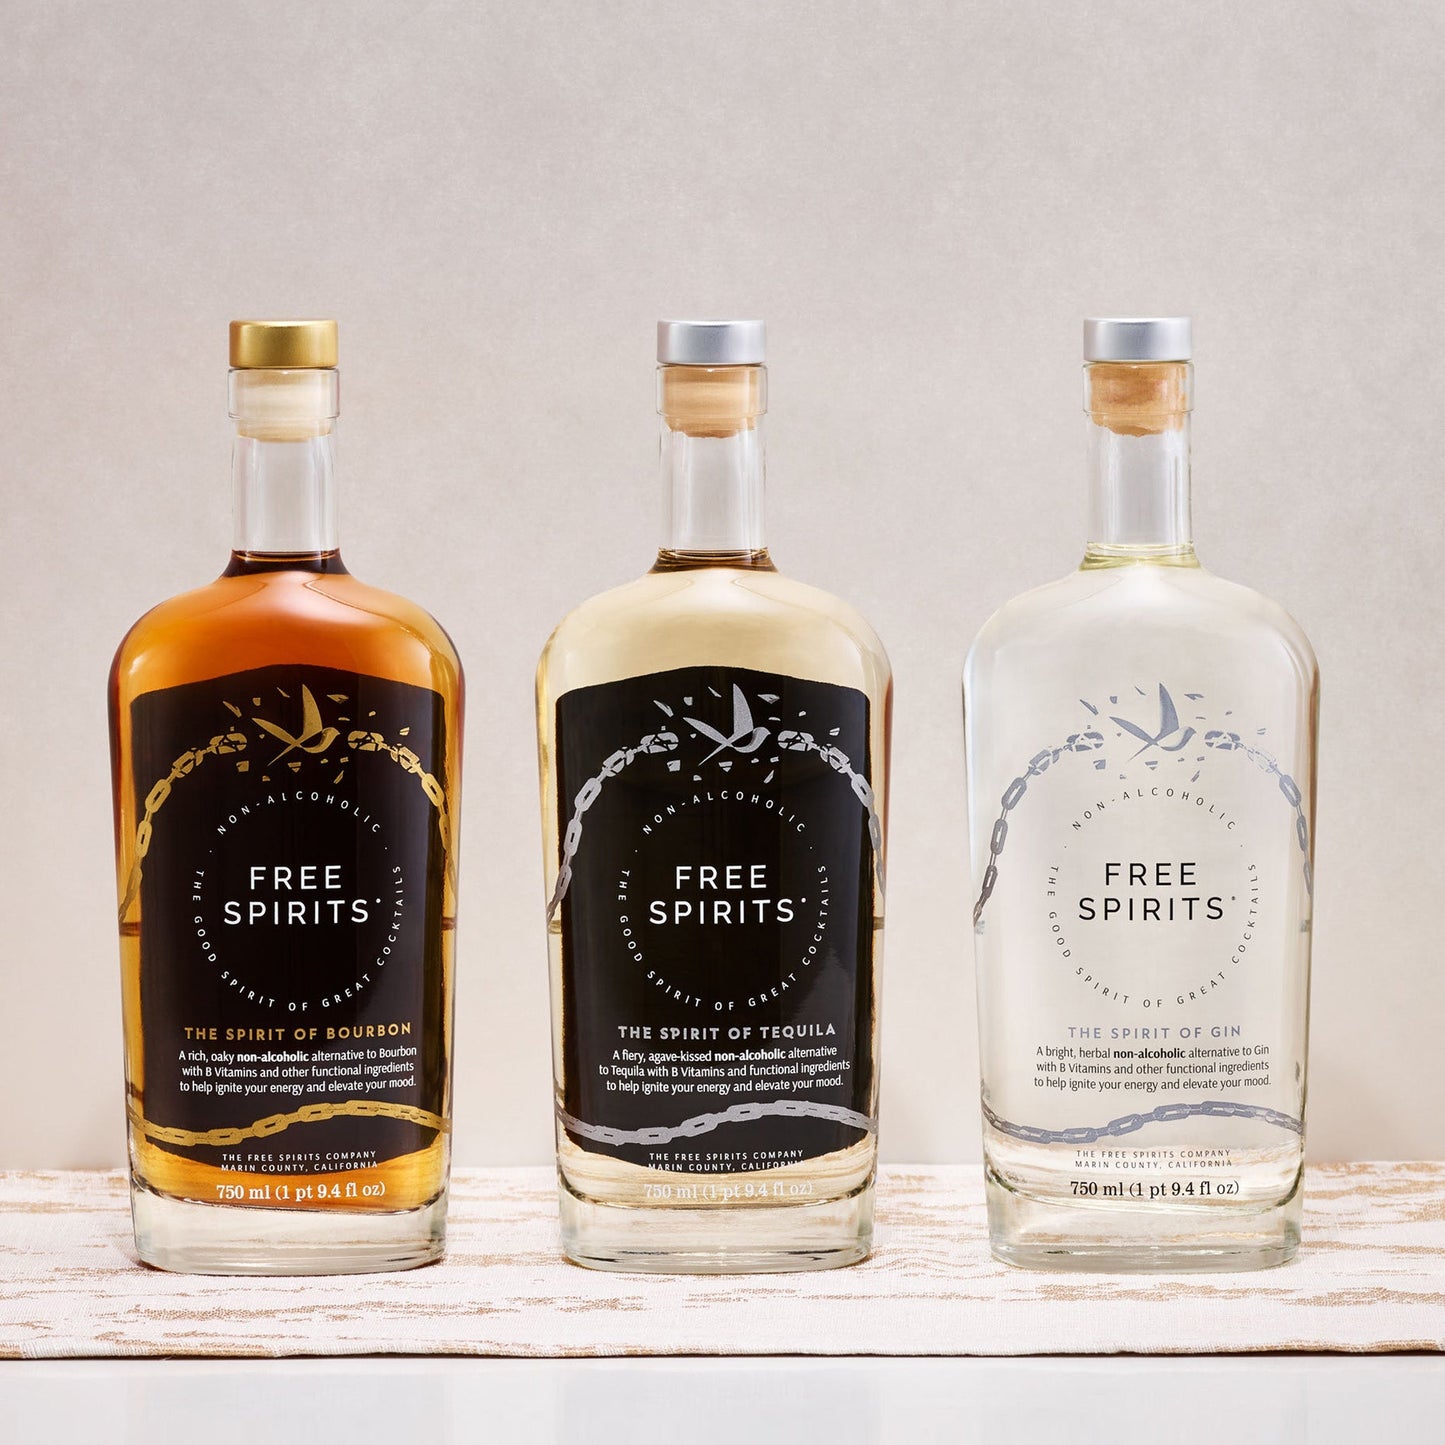 Bundle: The Free Spirits Trifecta by The Free Spirits Company